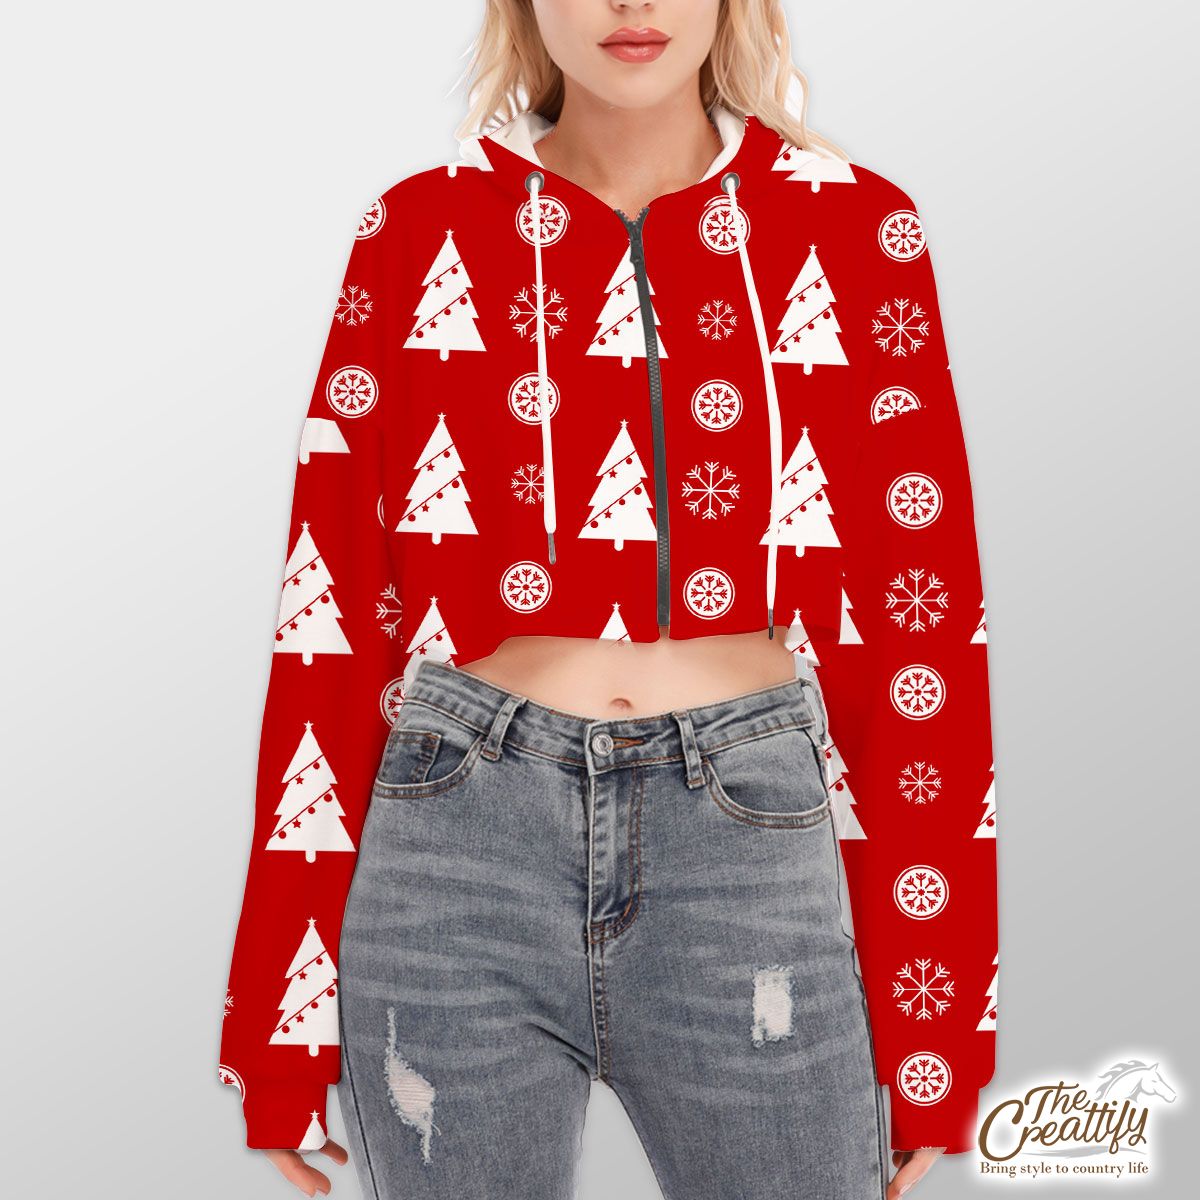 Pine Tree Decorated With Christmas Light And Snowflake Seamless Red Pattern Hoodie With Zipper Closure